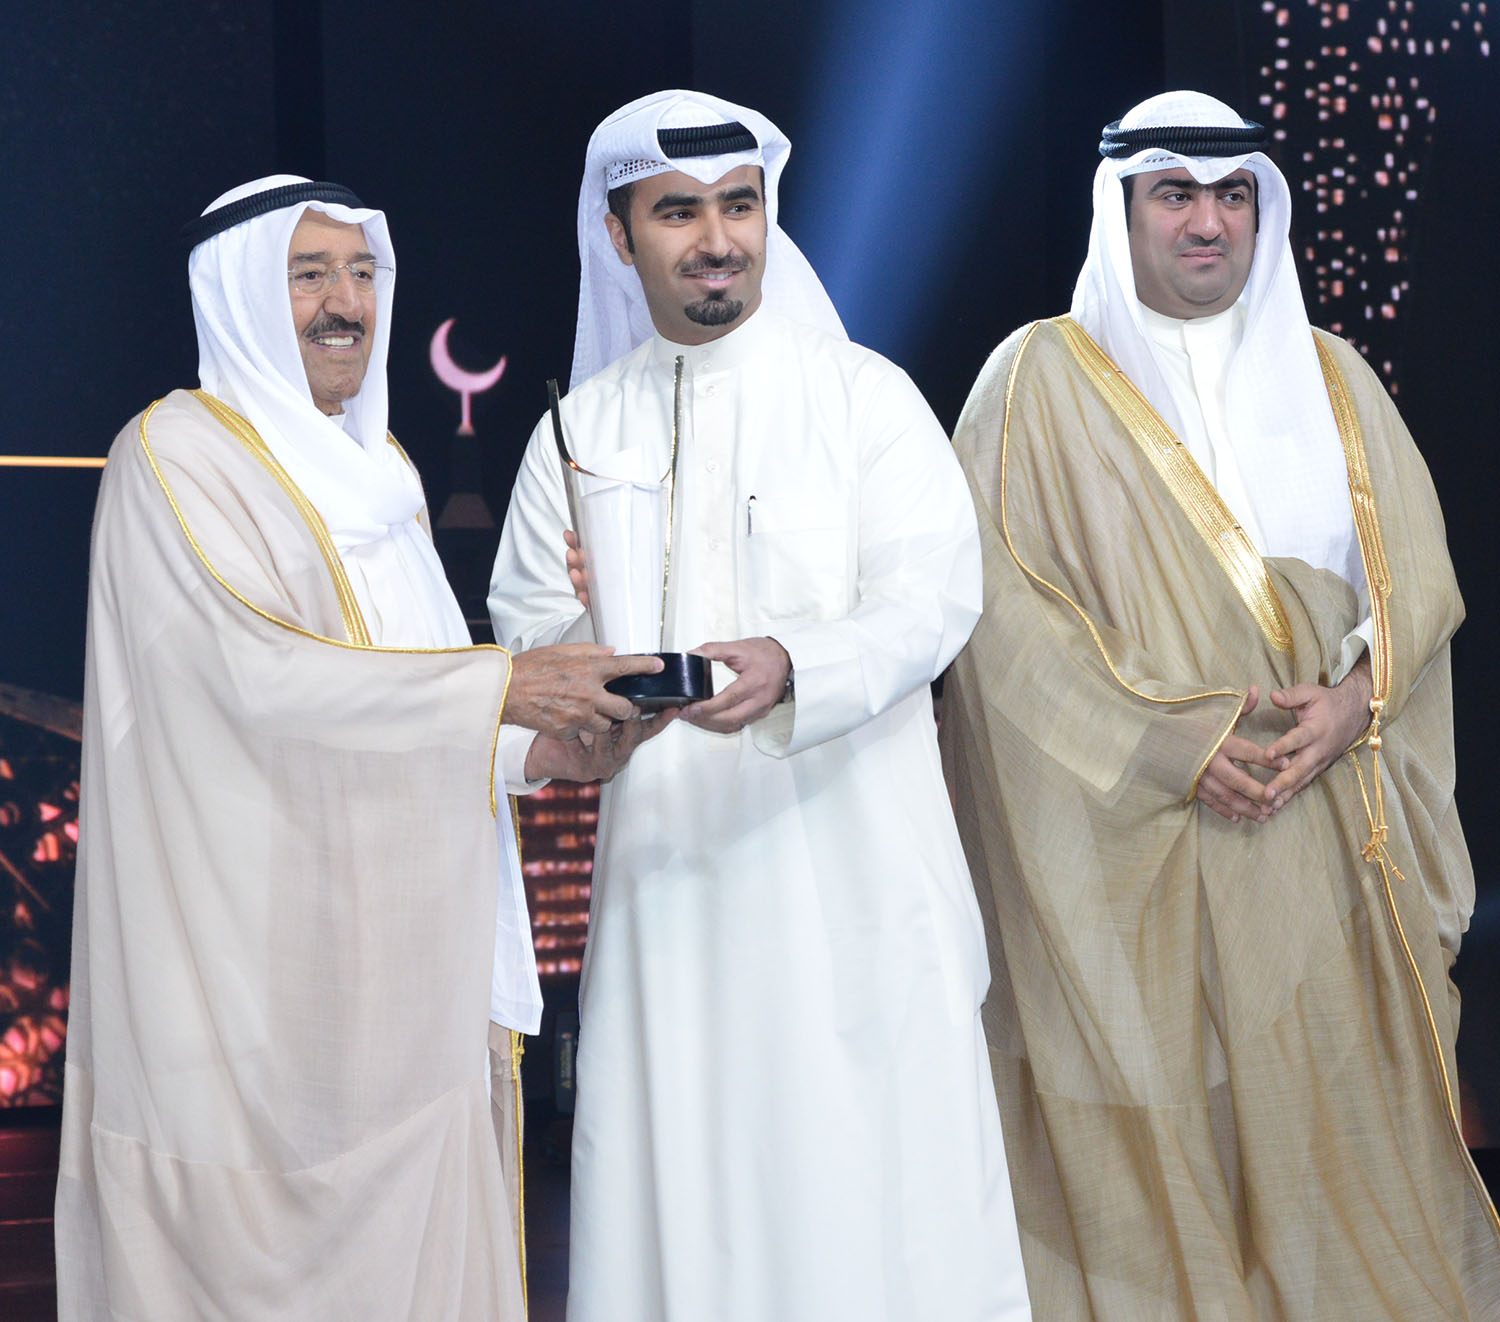 His Highness the Amir Sheikh Sabah Al-Ahmad Al-Jaber Al-Sabah honored the winners of Kuwait Youth Excellence and Creativity Award